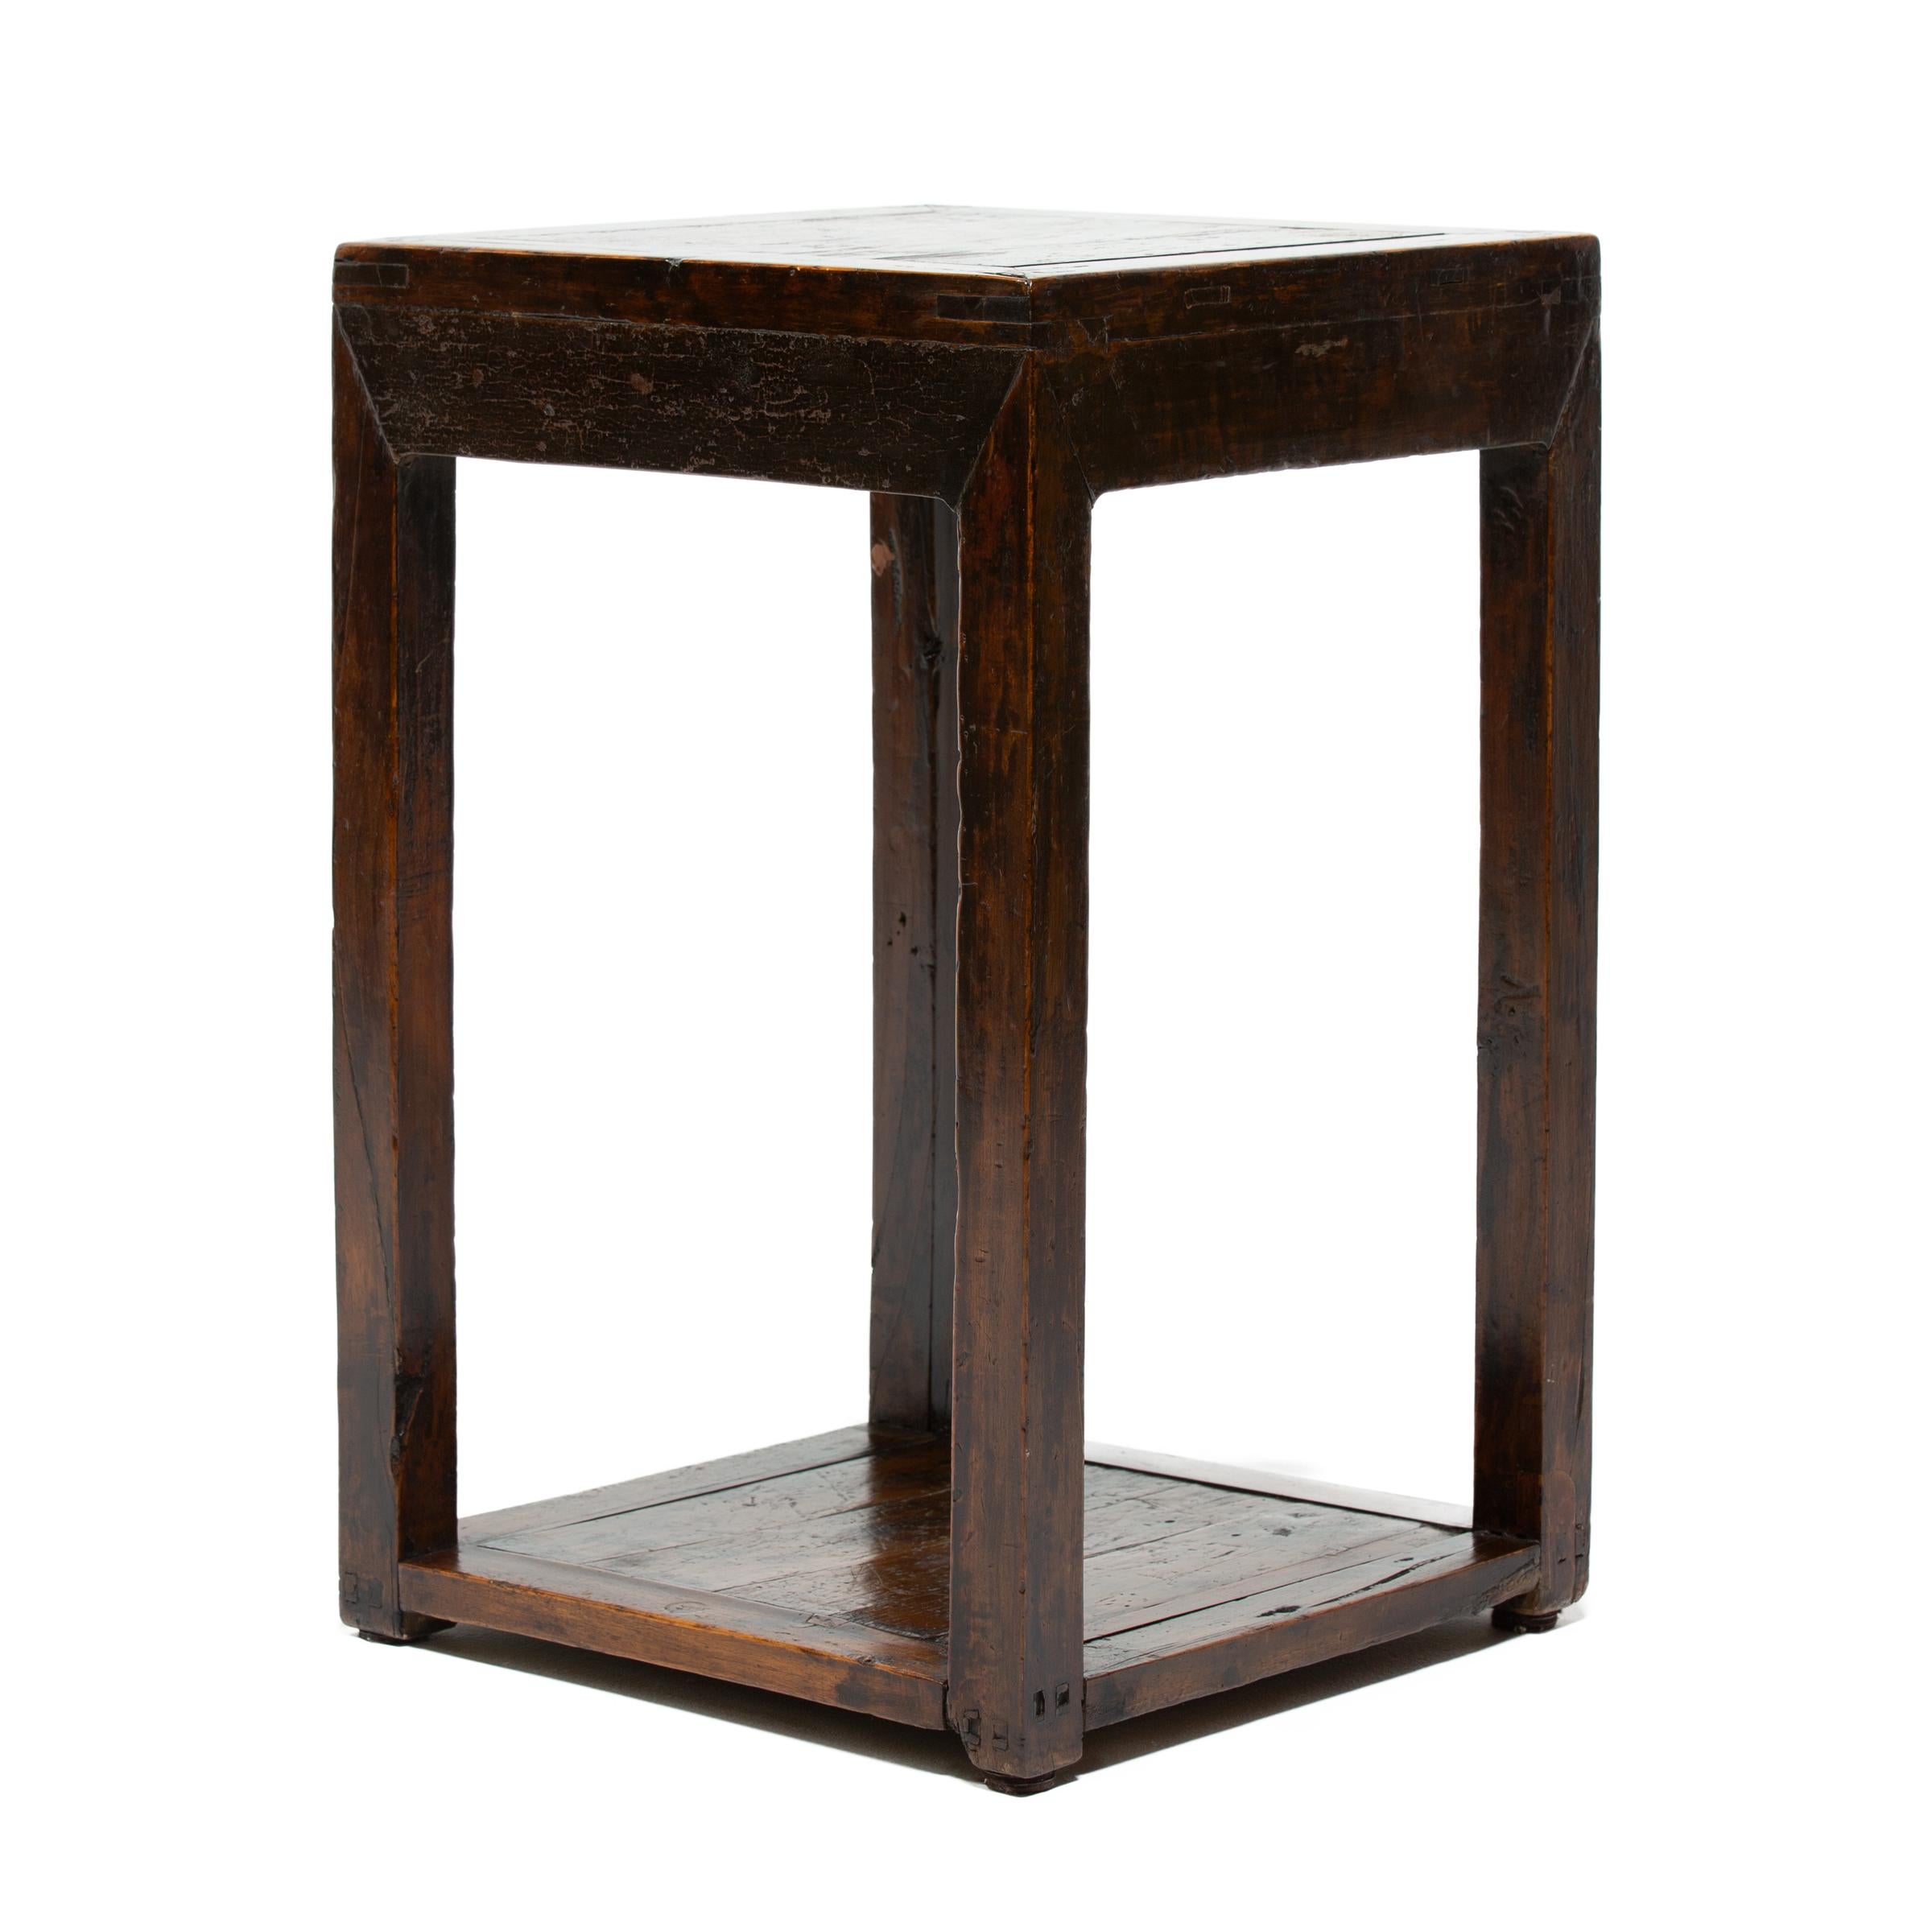 It’s difficult to distinguish this square pedestal from a modern Parson’s side table - both exhibit clean lines and a great Silhouette. Crafted of northern elmwood (yumu) using mortise-and-tenon joinery techniques, the pedestal features straight